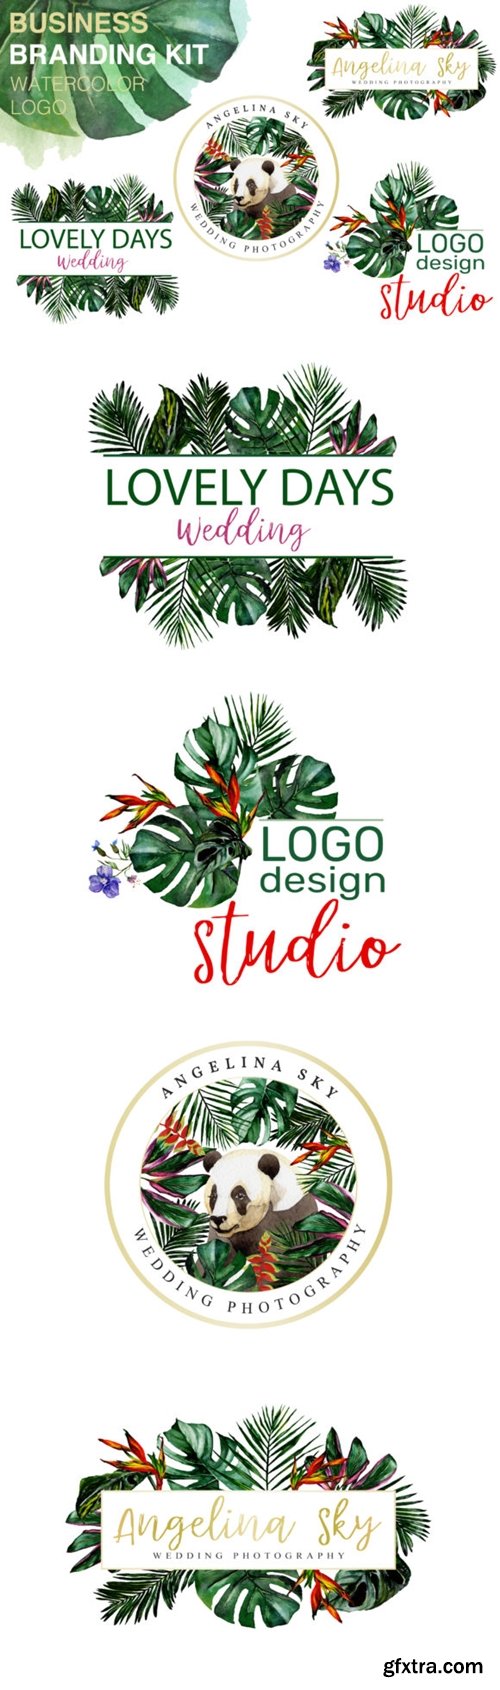 LOGO in Tropical Style Watercolor Png